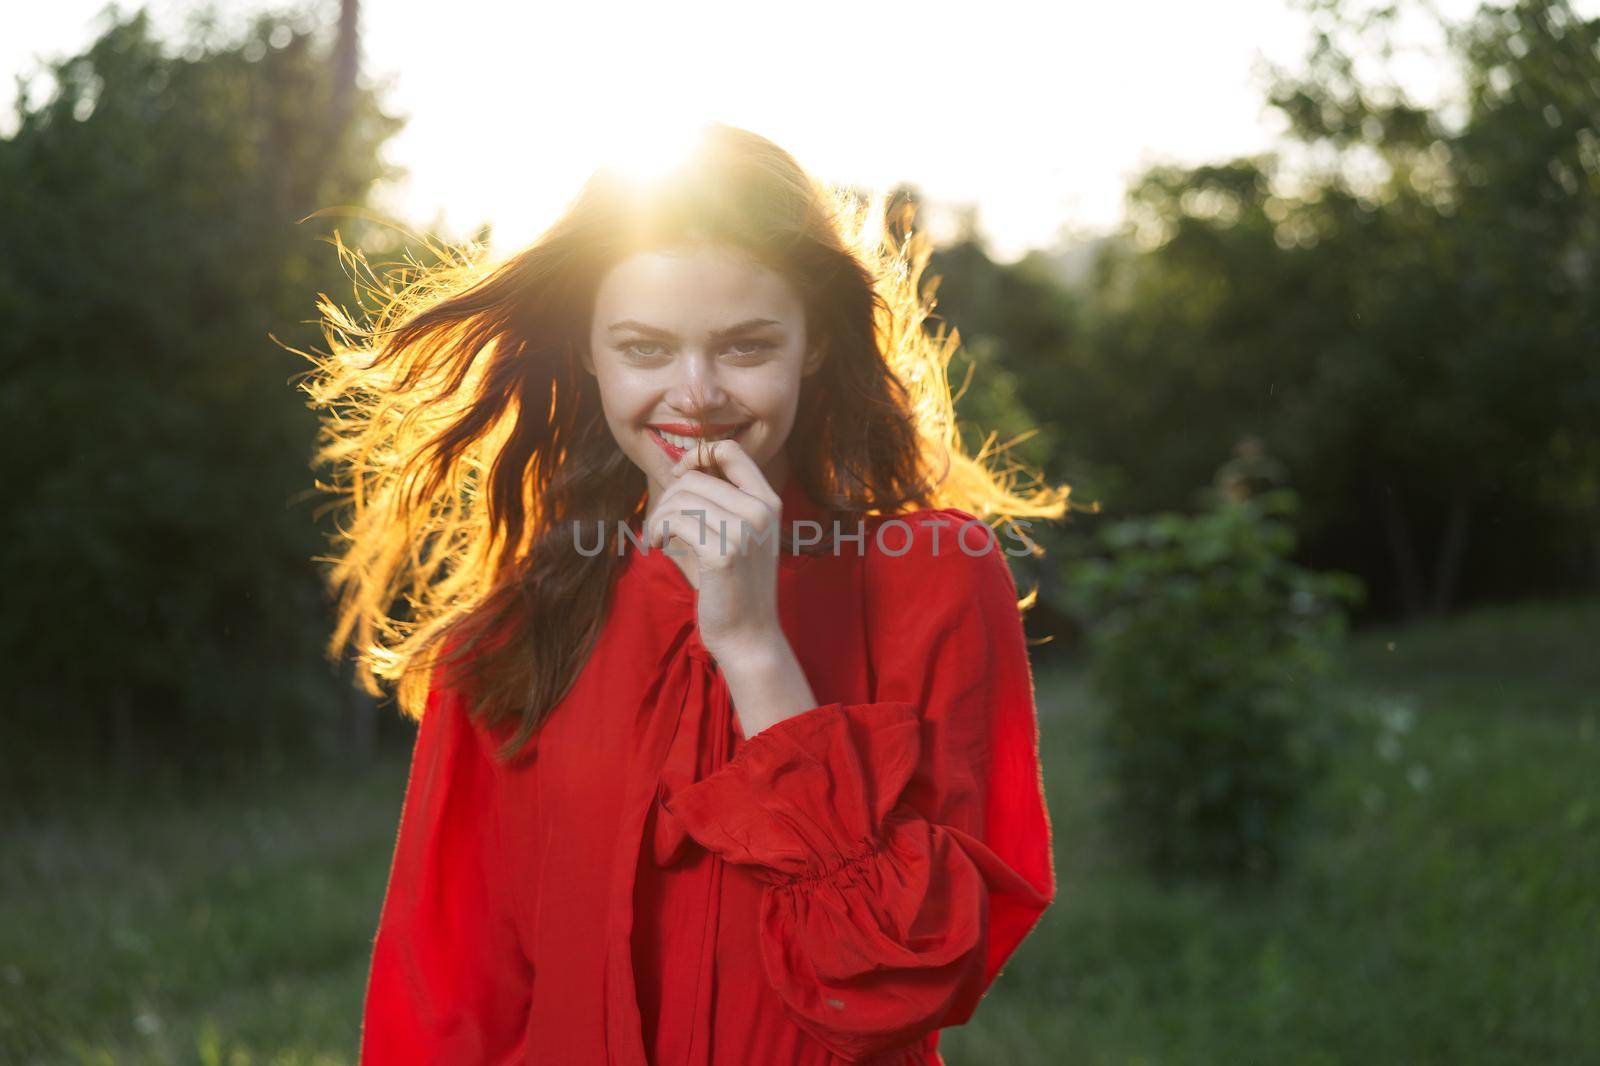 cheerful woman in a red dress in a field outdoors fresh air by Vichizh